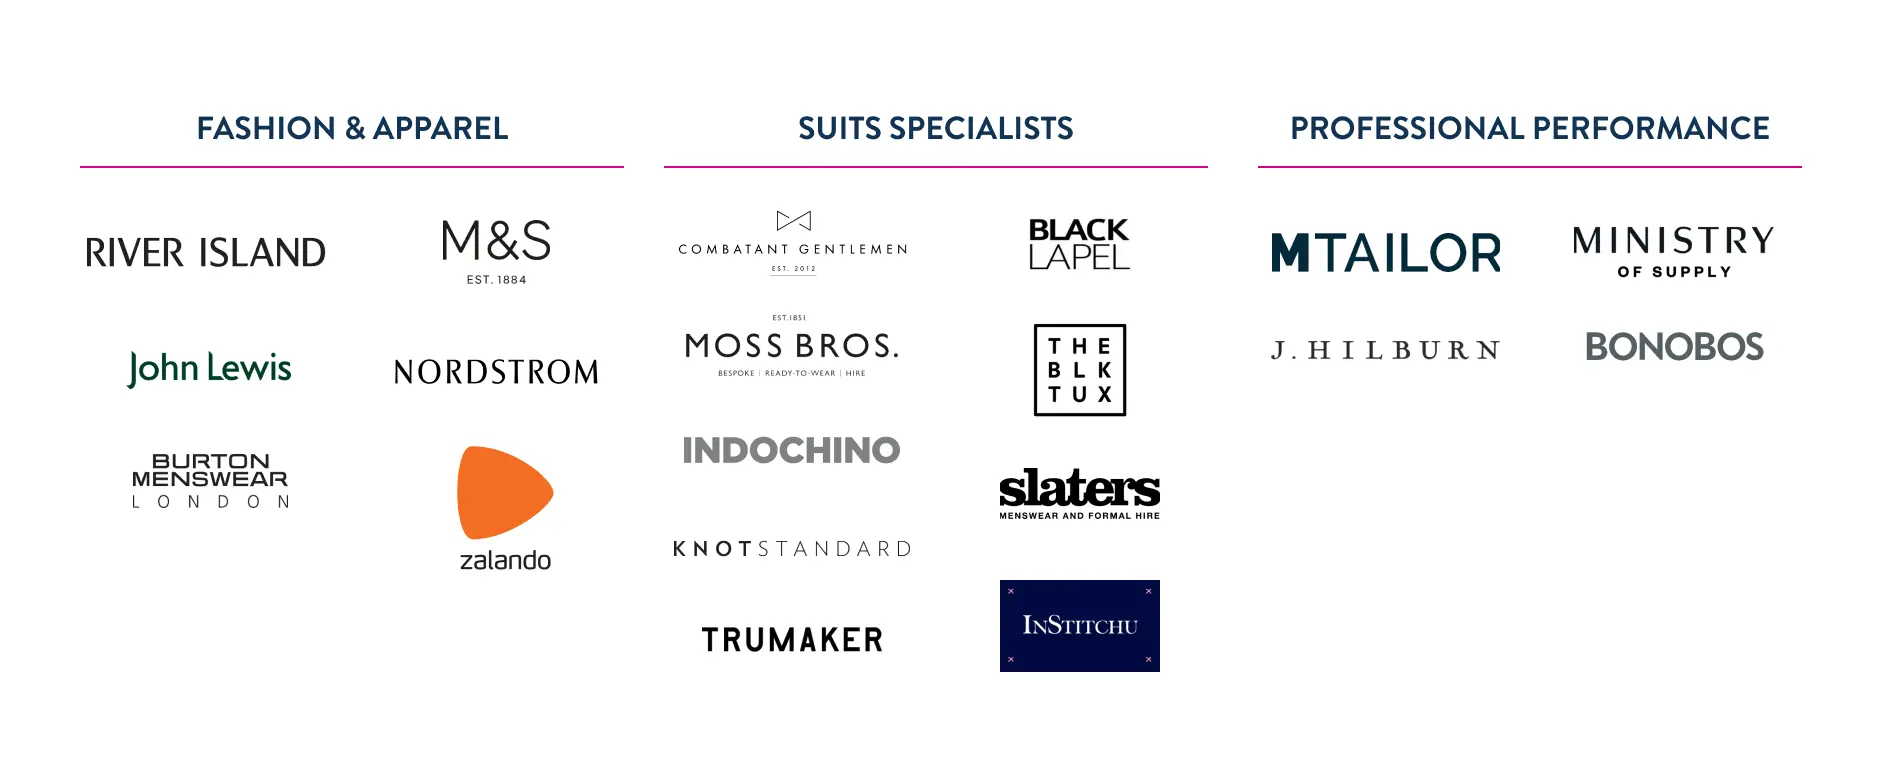 A graphic comparing popular online suit retailers in the UK and US, categorised by fashion focus, specialisation, and innovation.